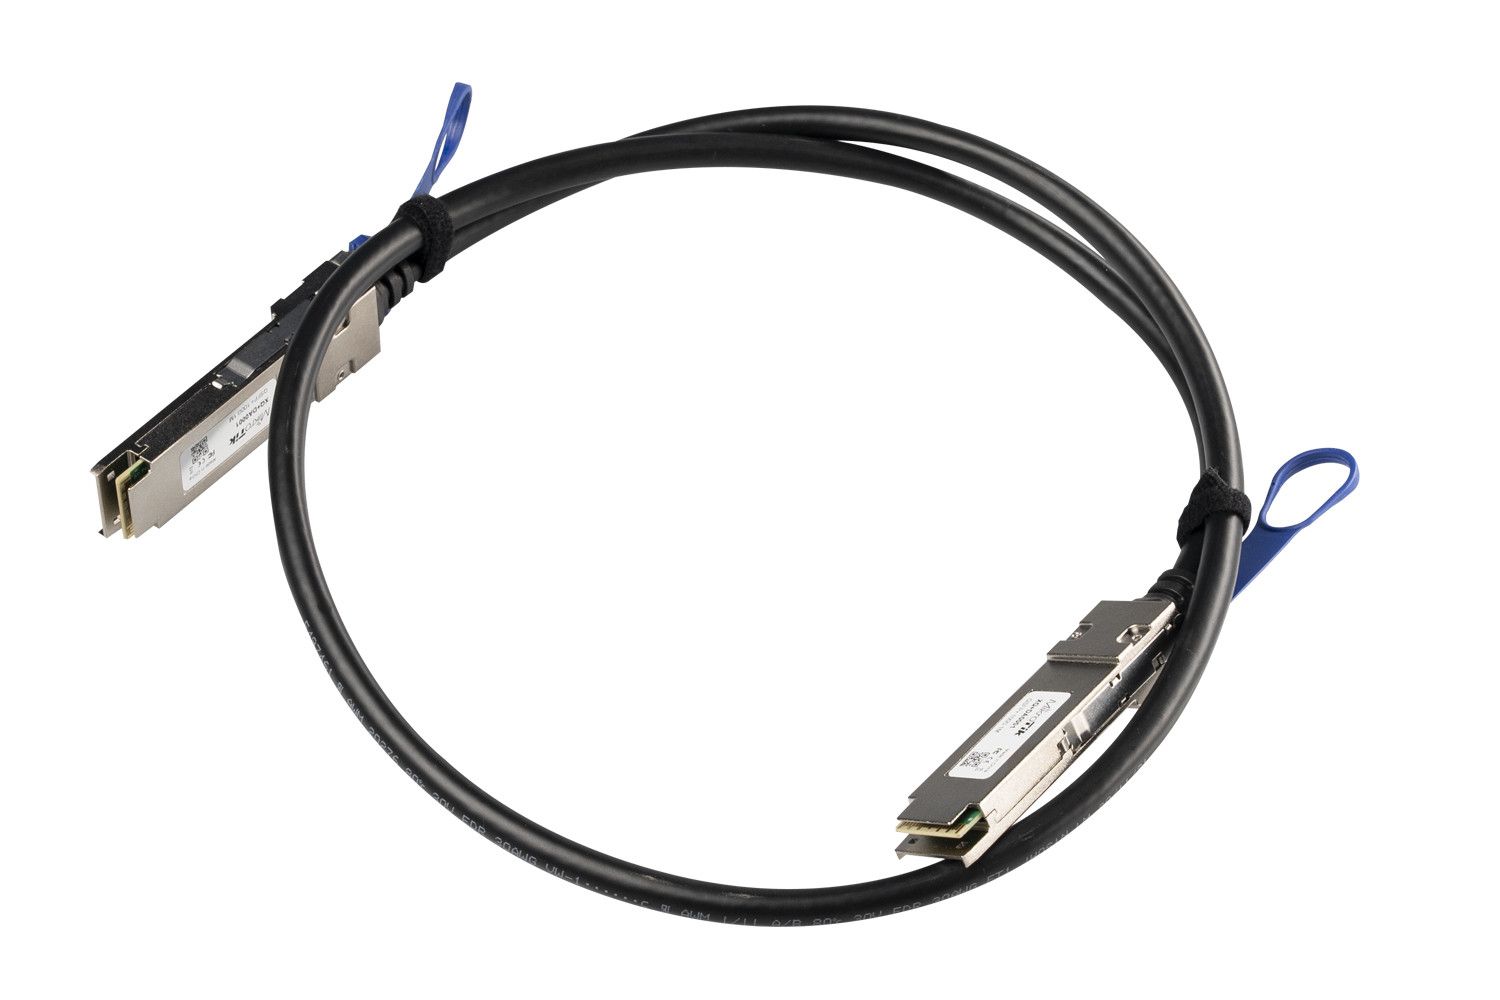 QSFP28 direct attach cable 40/100G 1m